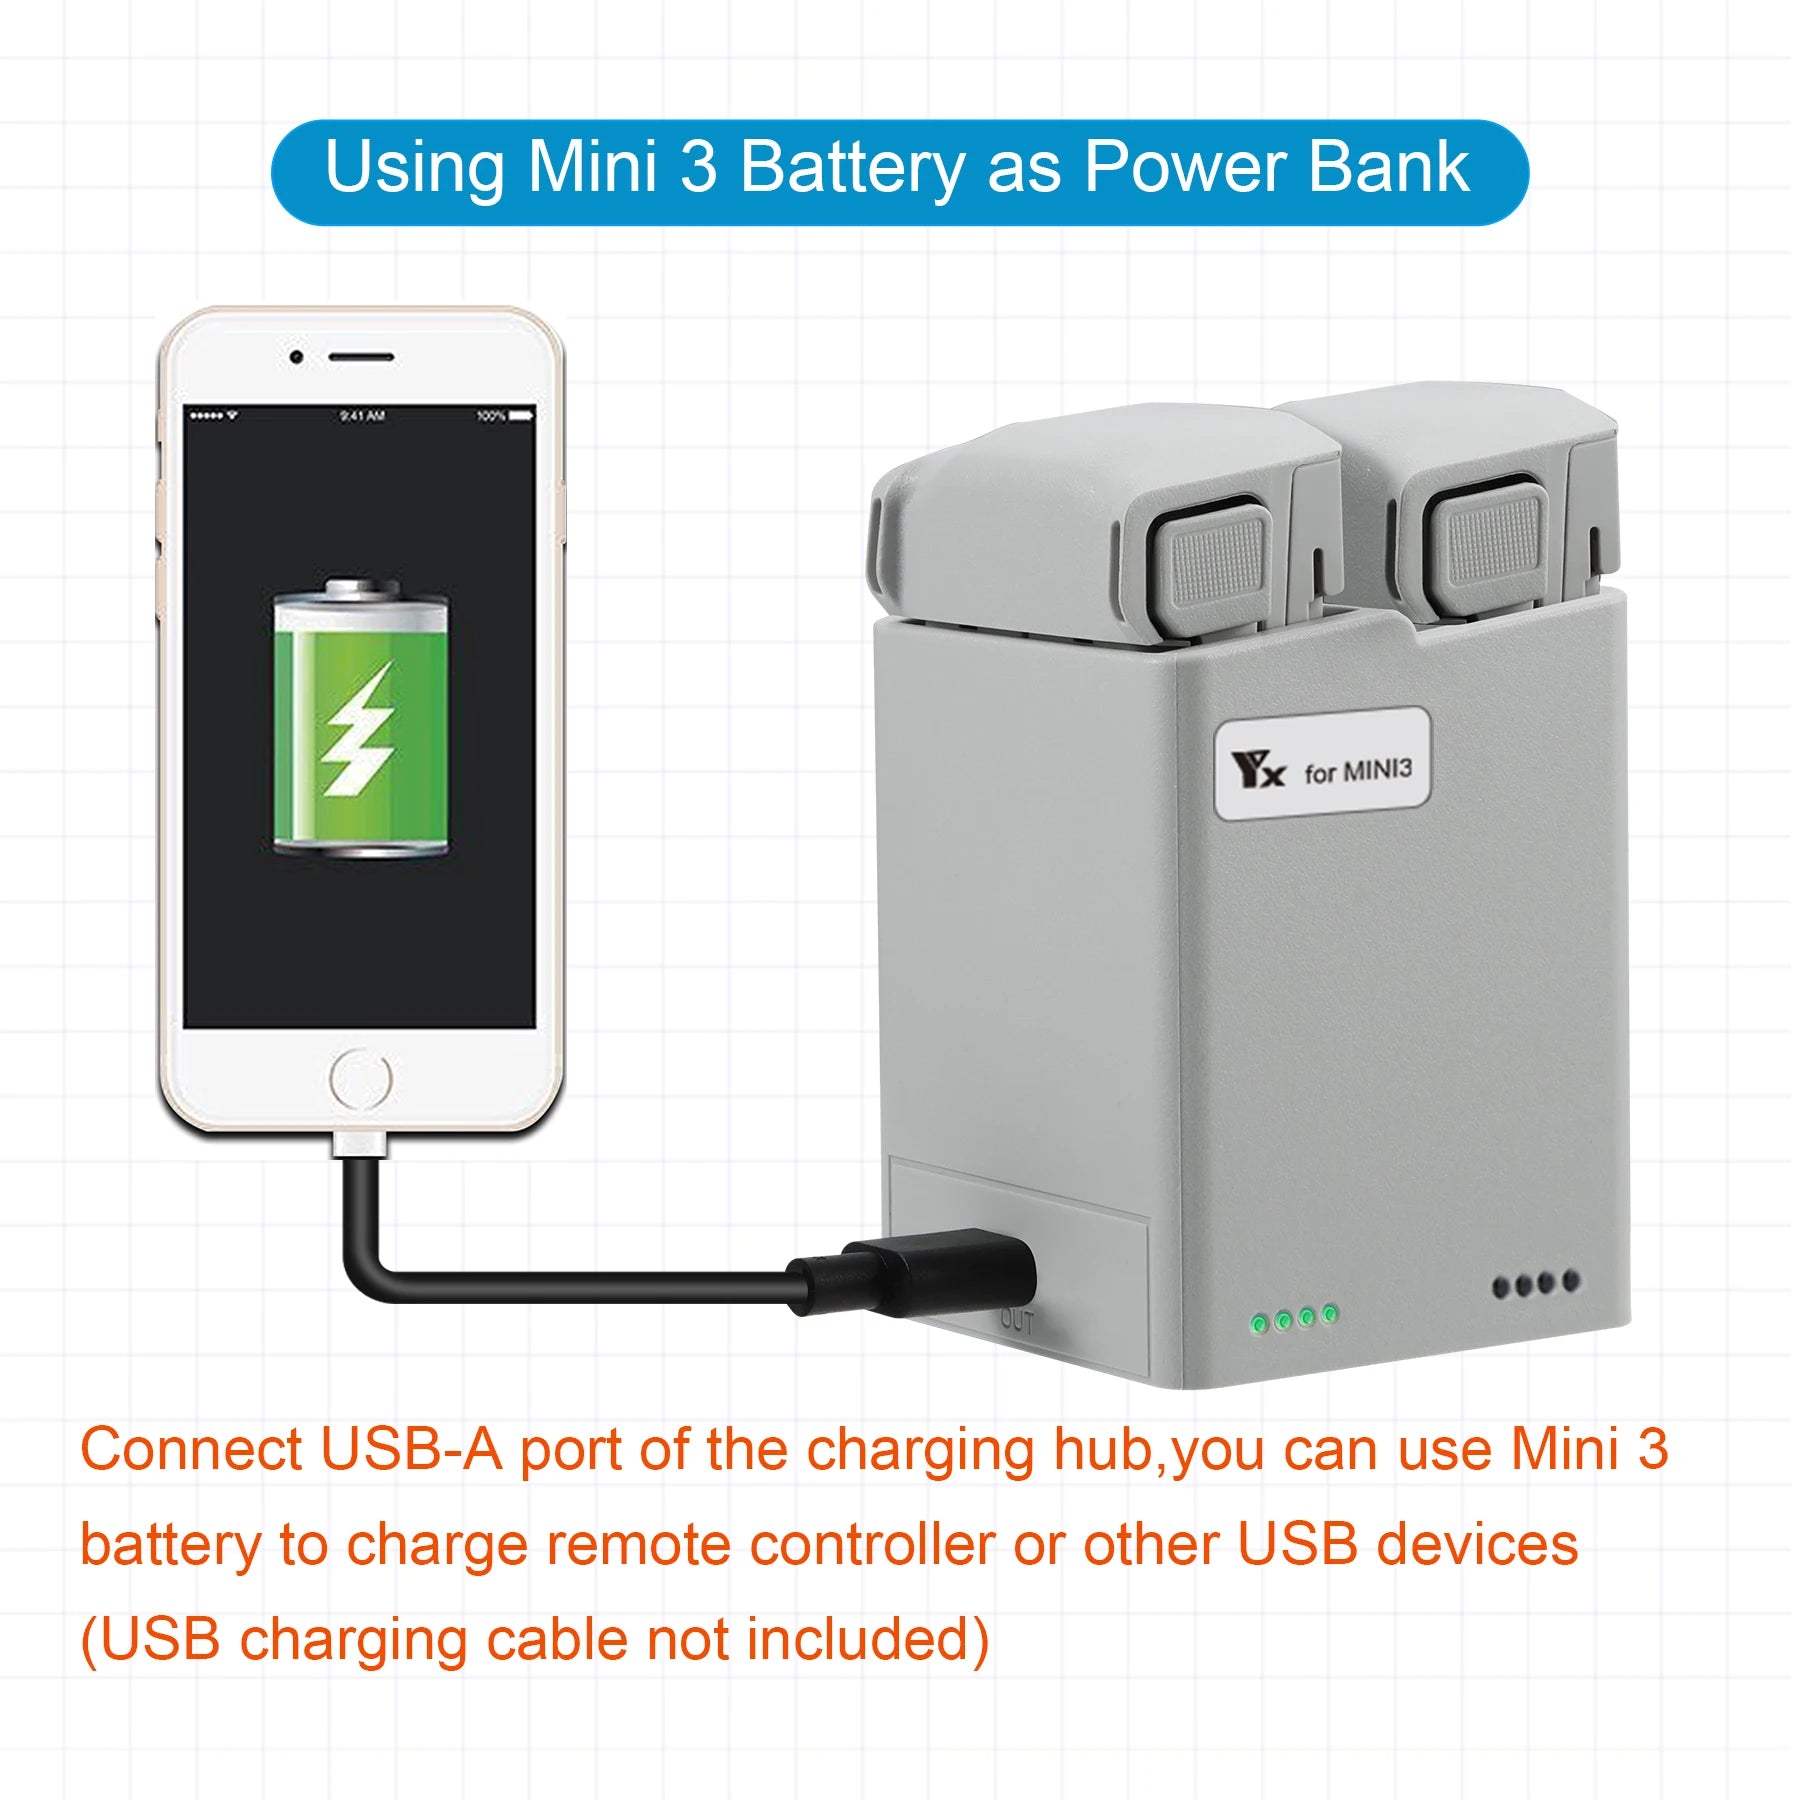 Using Mini 3 Battery as Power Bank for MINI3 Connect USB-A port of the charging